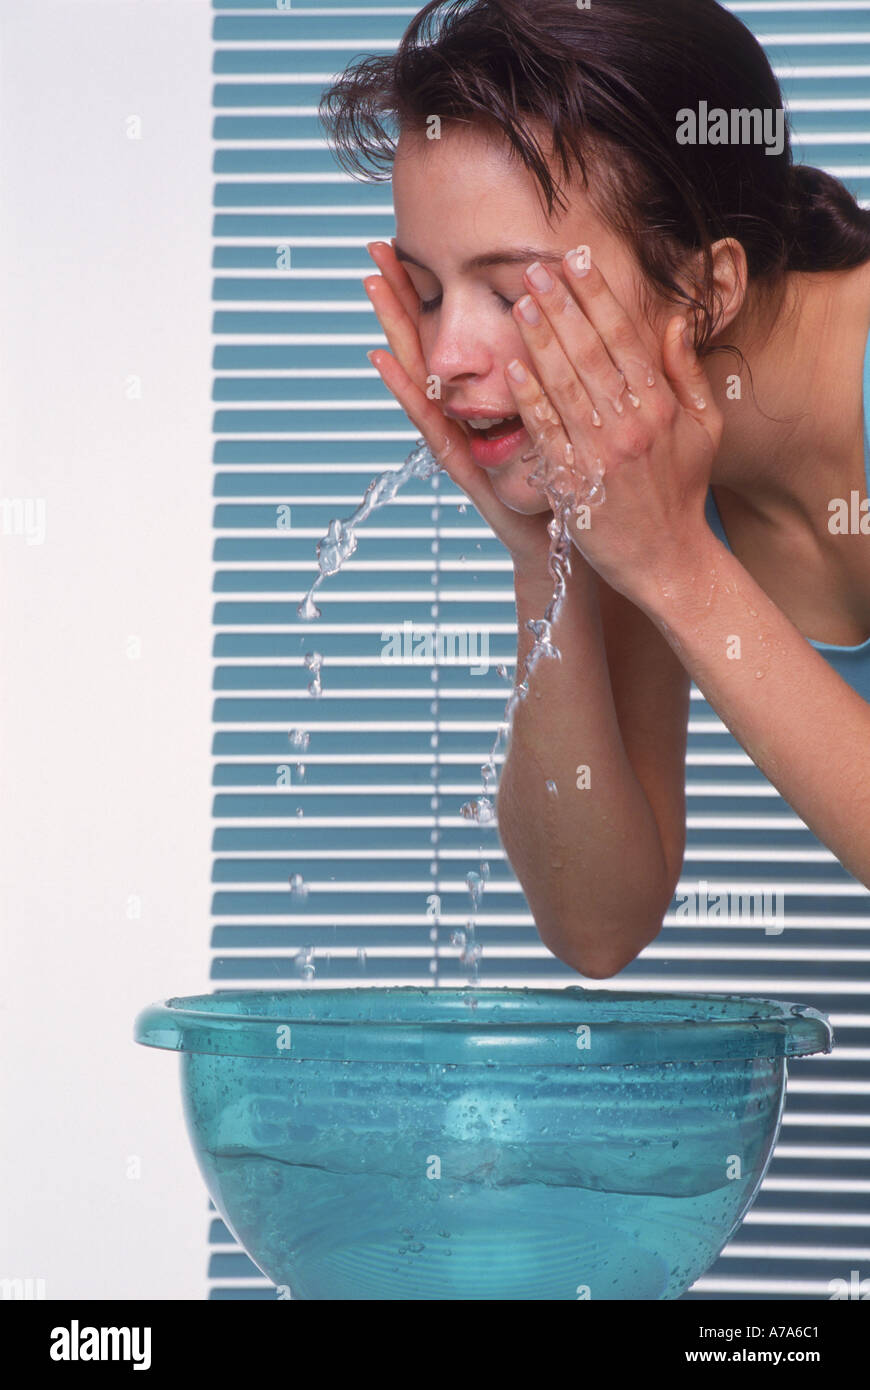 young woman refreshing her face Stock Photo